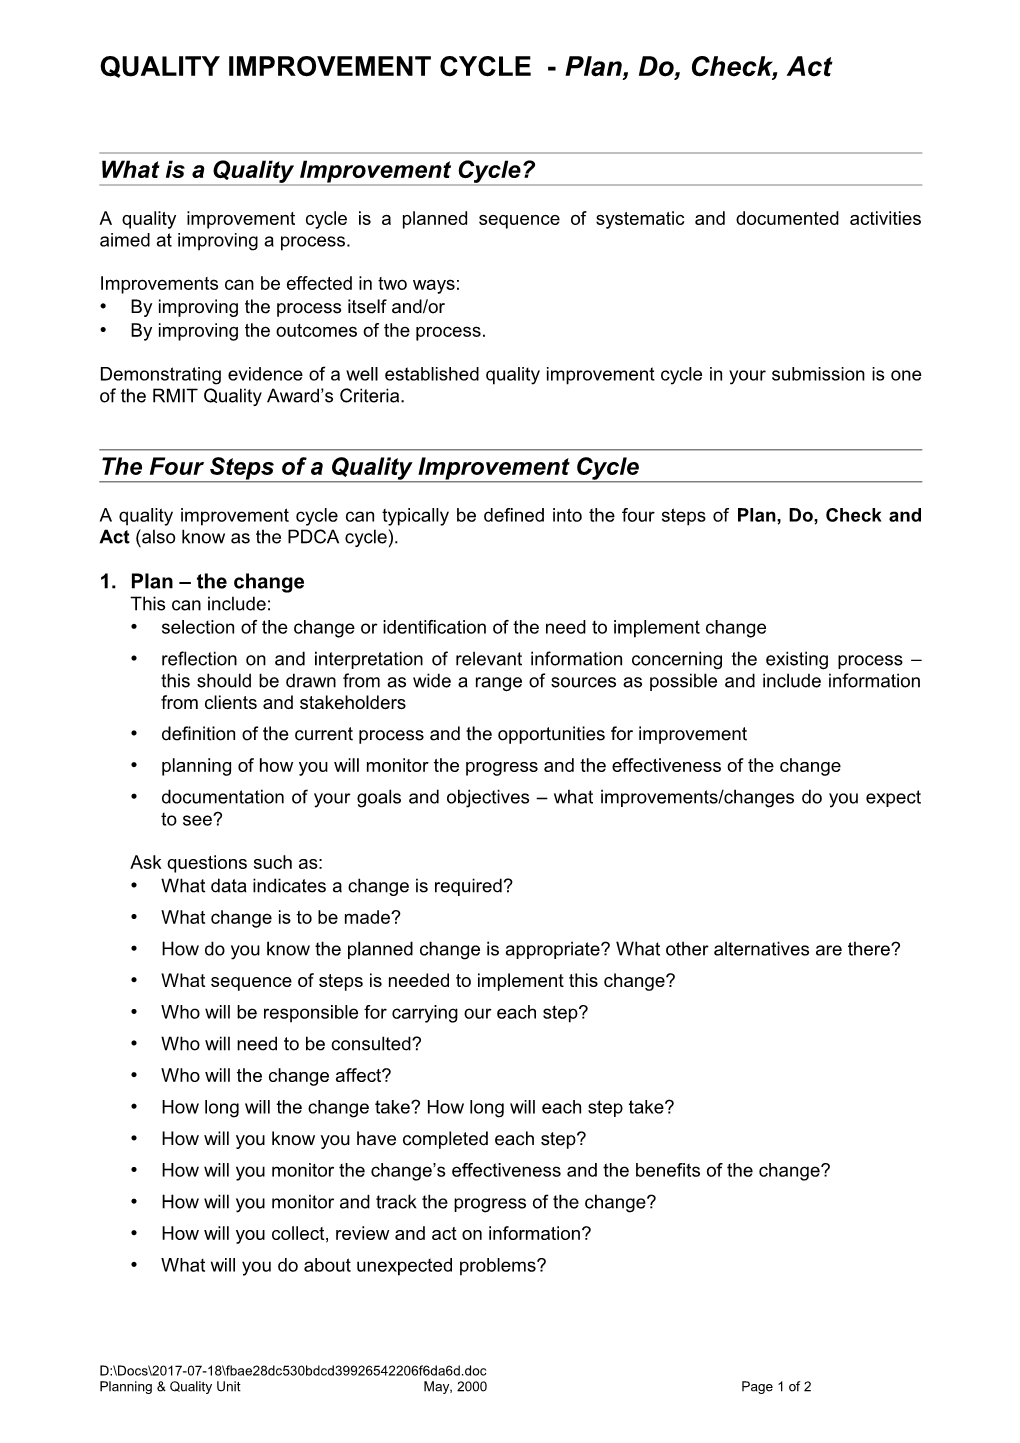 QUALITY IMPROVEMENT CYCLE - Plan, Do, Check, Act